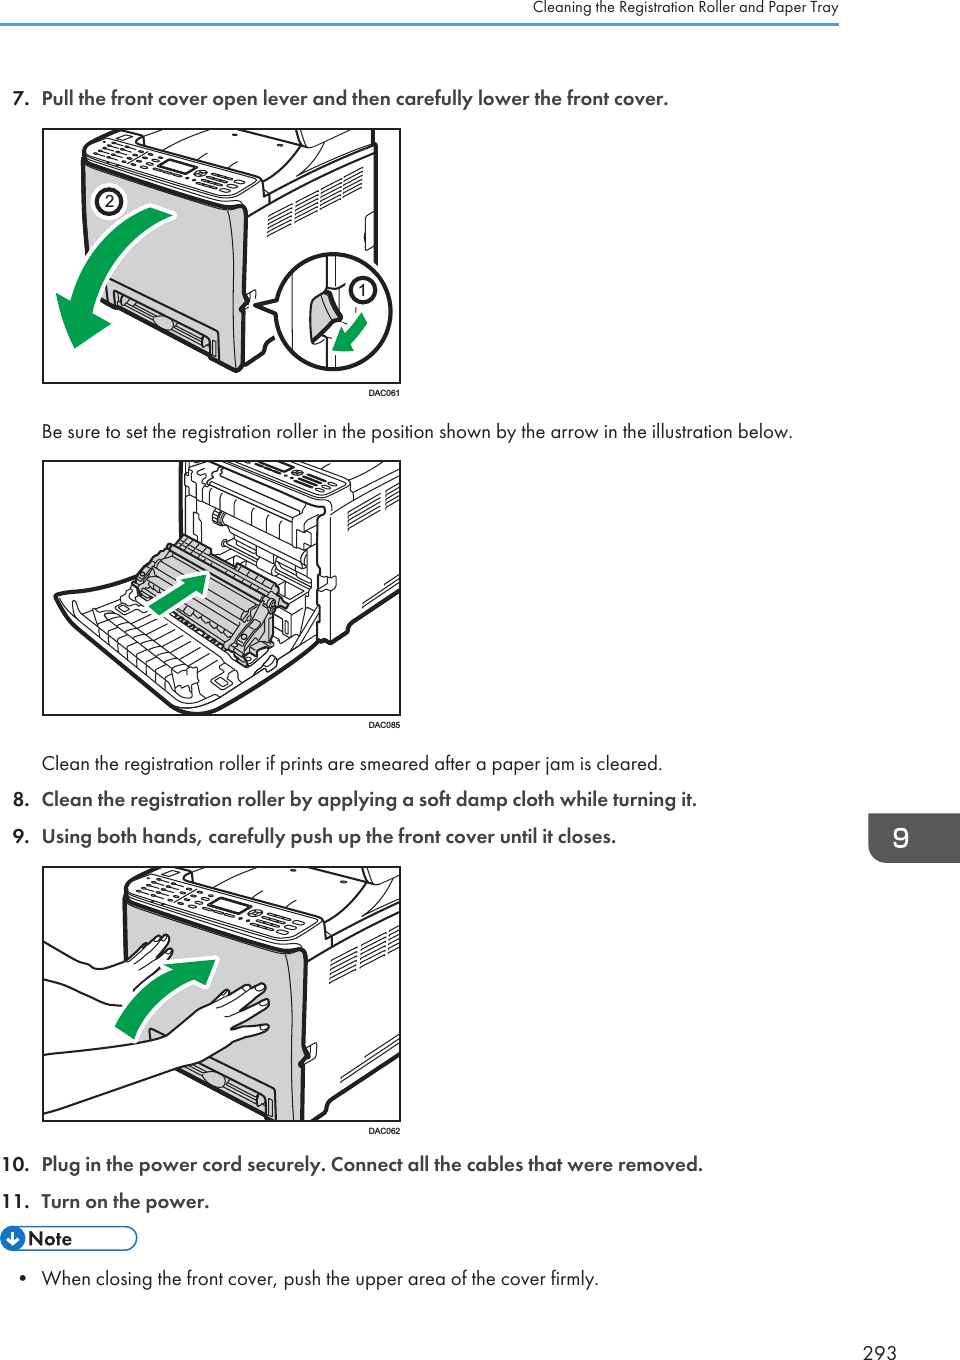 7. Pull the front cover open lever and then carefully lower the front cover.21DAC061Be sure to set the registration roller in the position shown by the arrow in the illustration below.DAC085Clean the registration roller if prints are smeared after a paper jam is cleared.8. Clean the registration roller by applying a soft damp cloth while turning it.9. Using both hands, carefully push up the front cover until it closes.DAC06210. Plug in the power cord securely. Connect all the cables that were removed.11. Turn on the power.• When closing the front cover, push the upper area of the cover firmly.Cleaning the Registration Roller and Paper Tray293